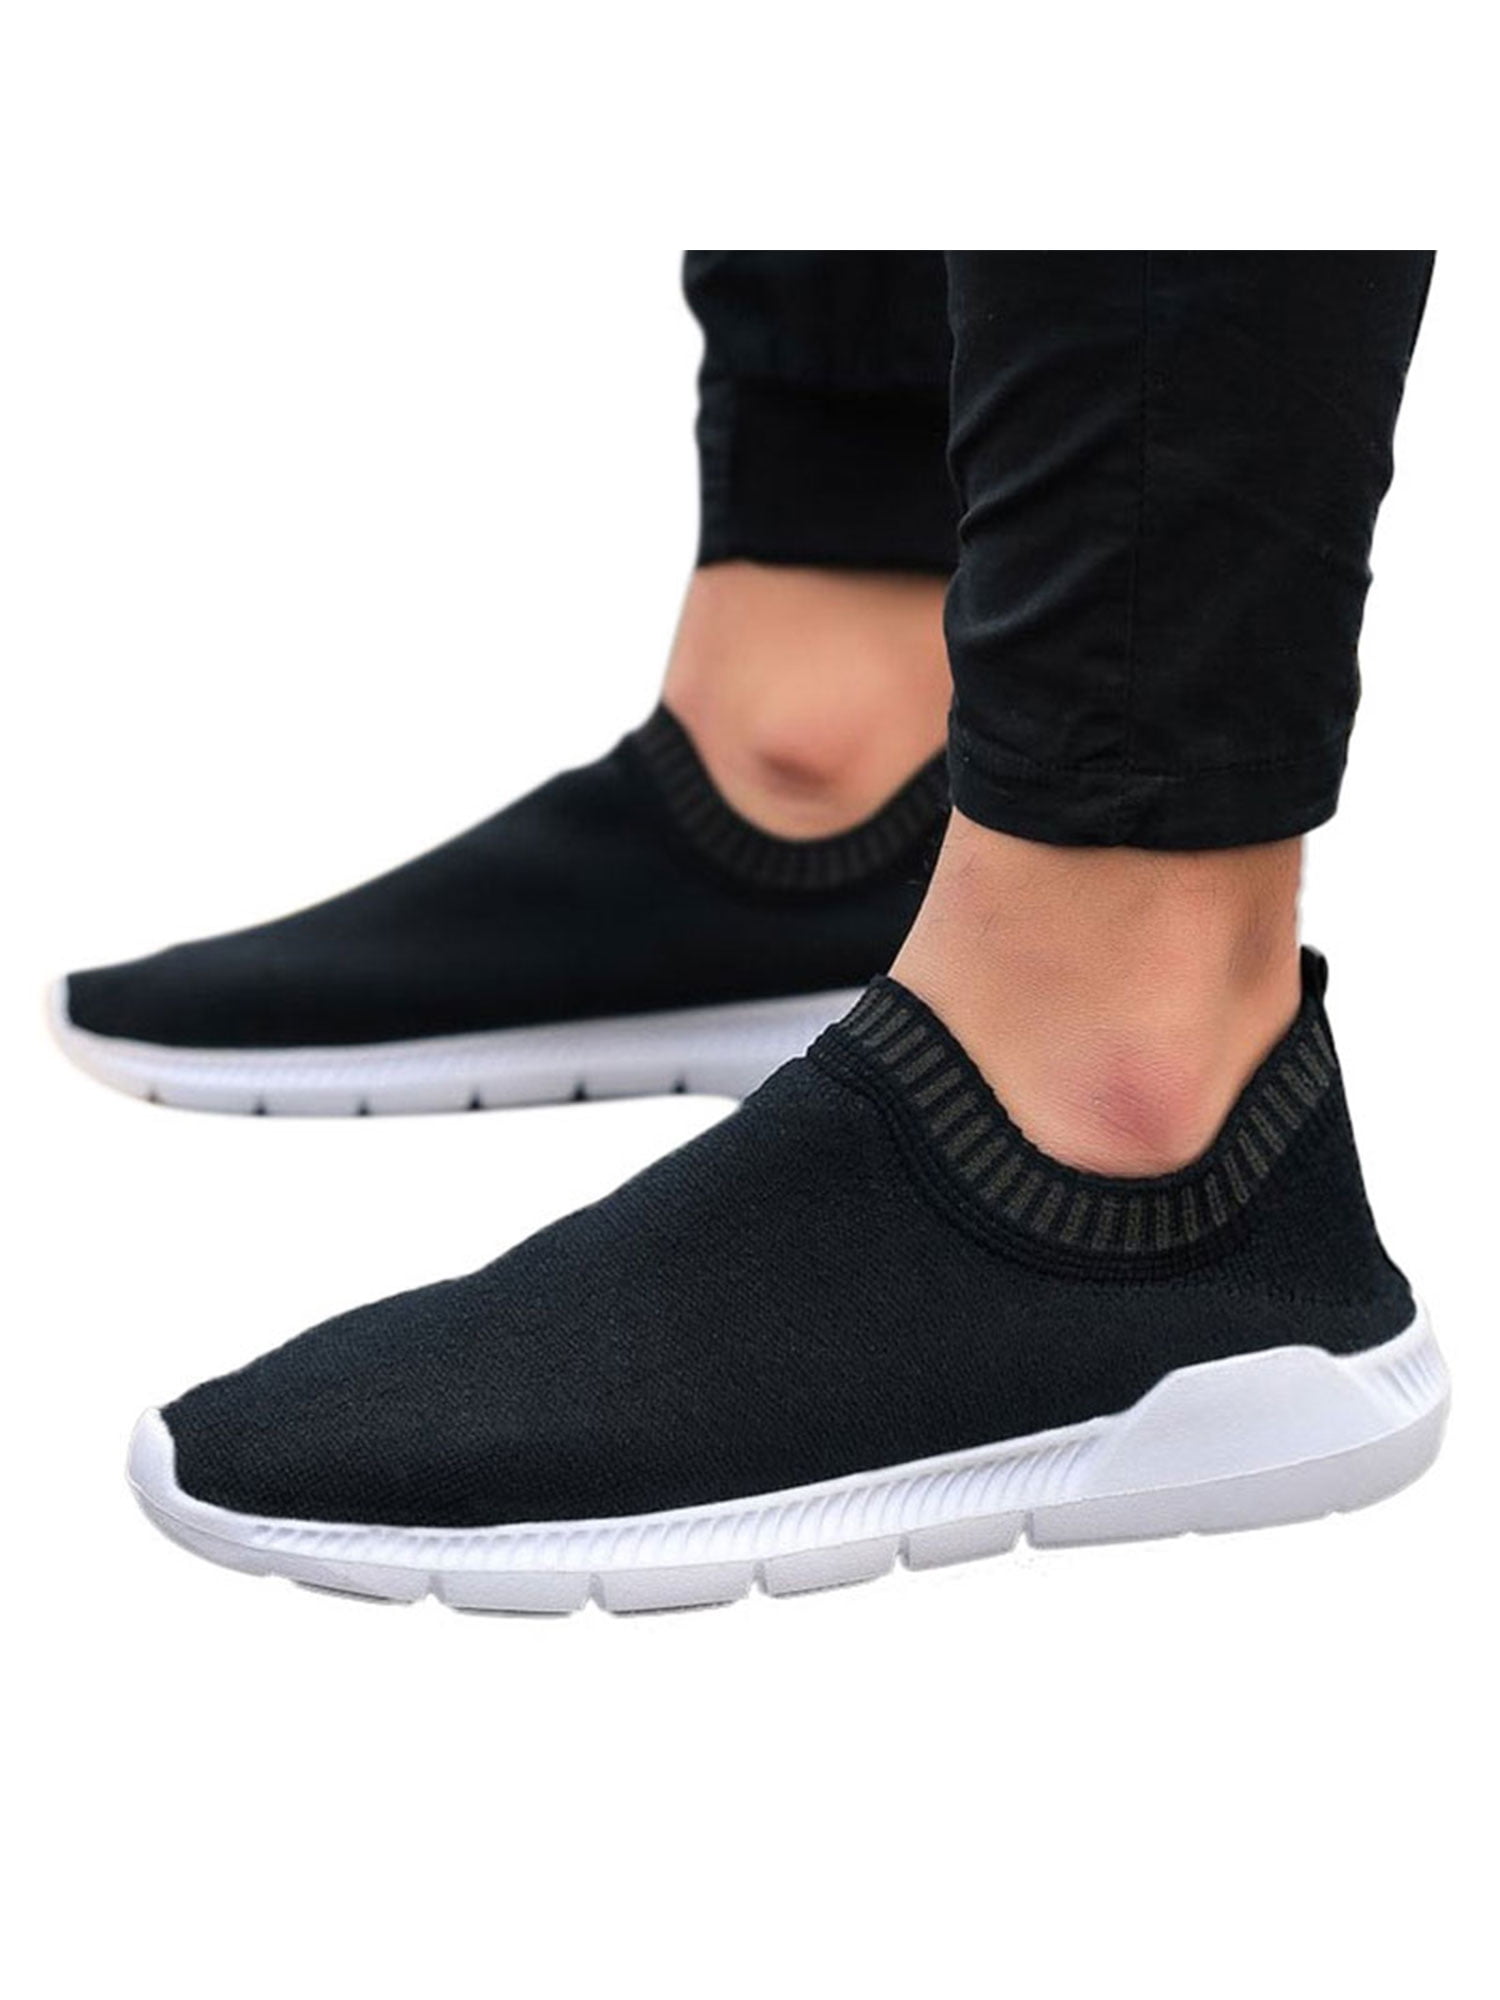 Mens Air Shock Gym Sports Shoes Running Trainers Lace Up Casual Pumps Sneakers